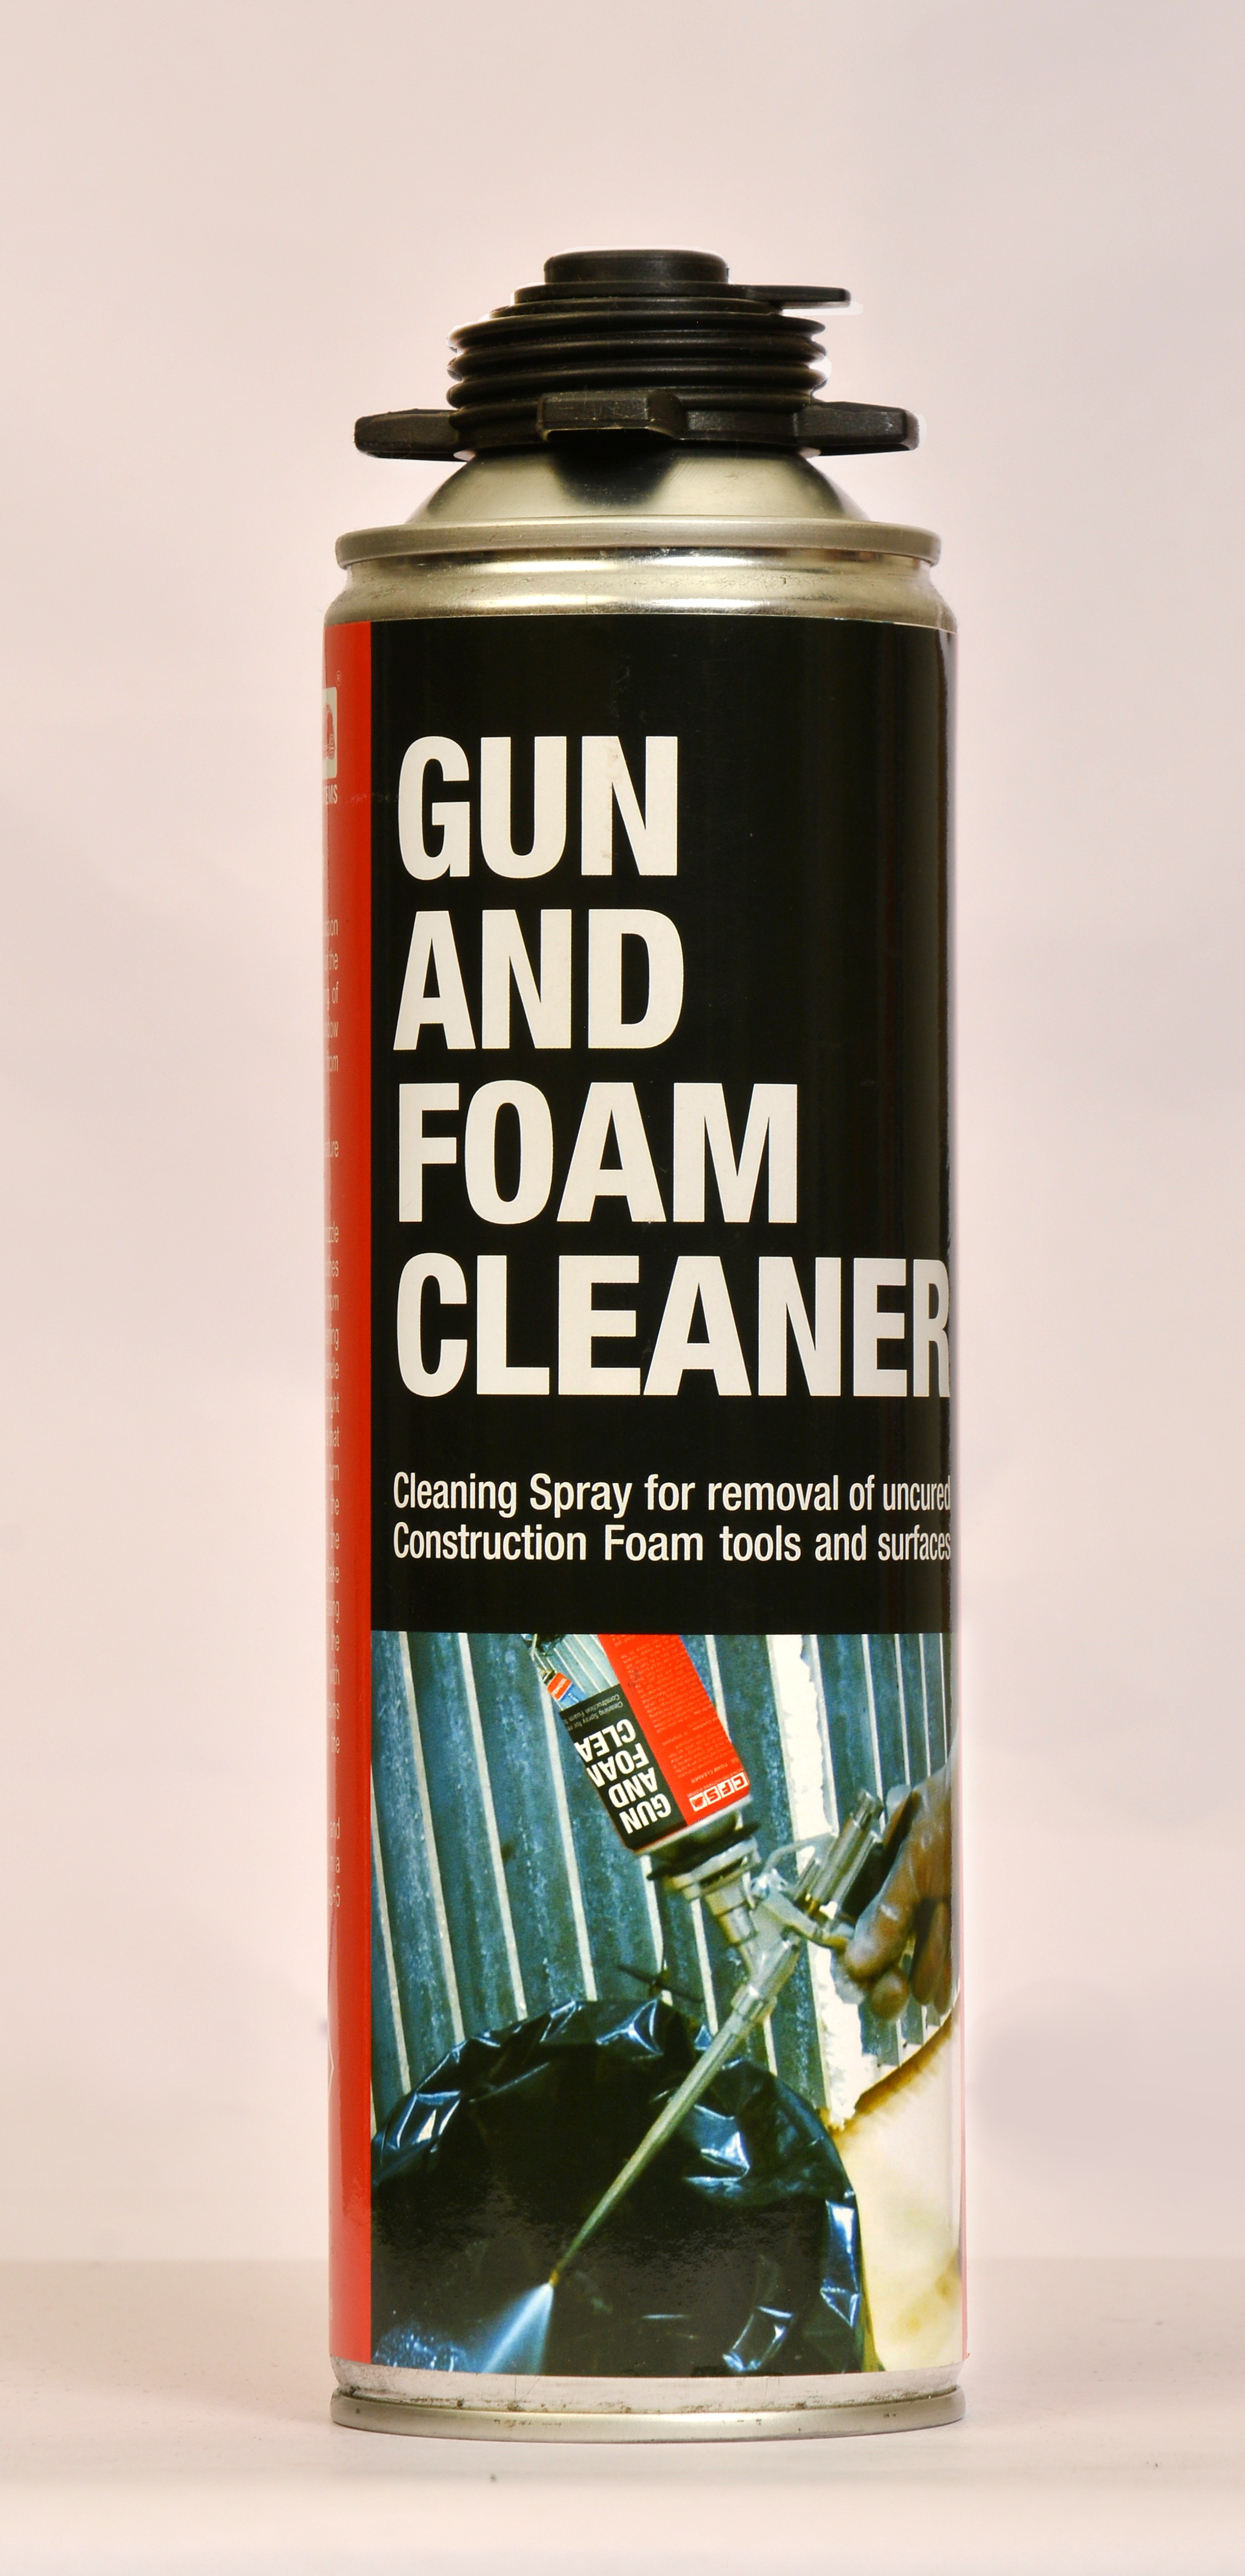 Gun and Foam Cleaner – Cleaning Spray for removal of Uncured Construction Foam Tools and Surfaces